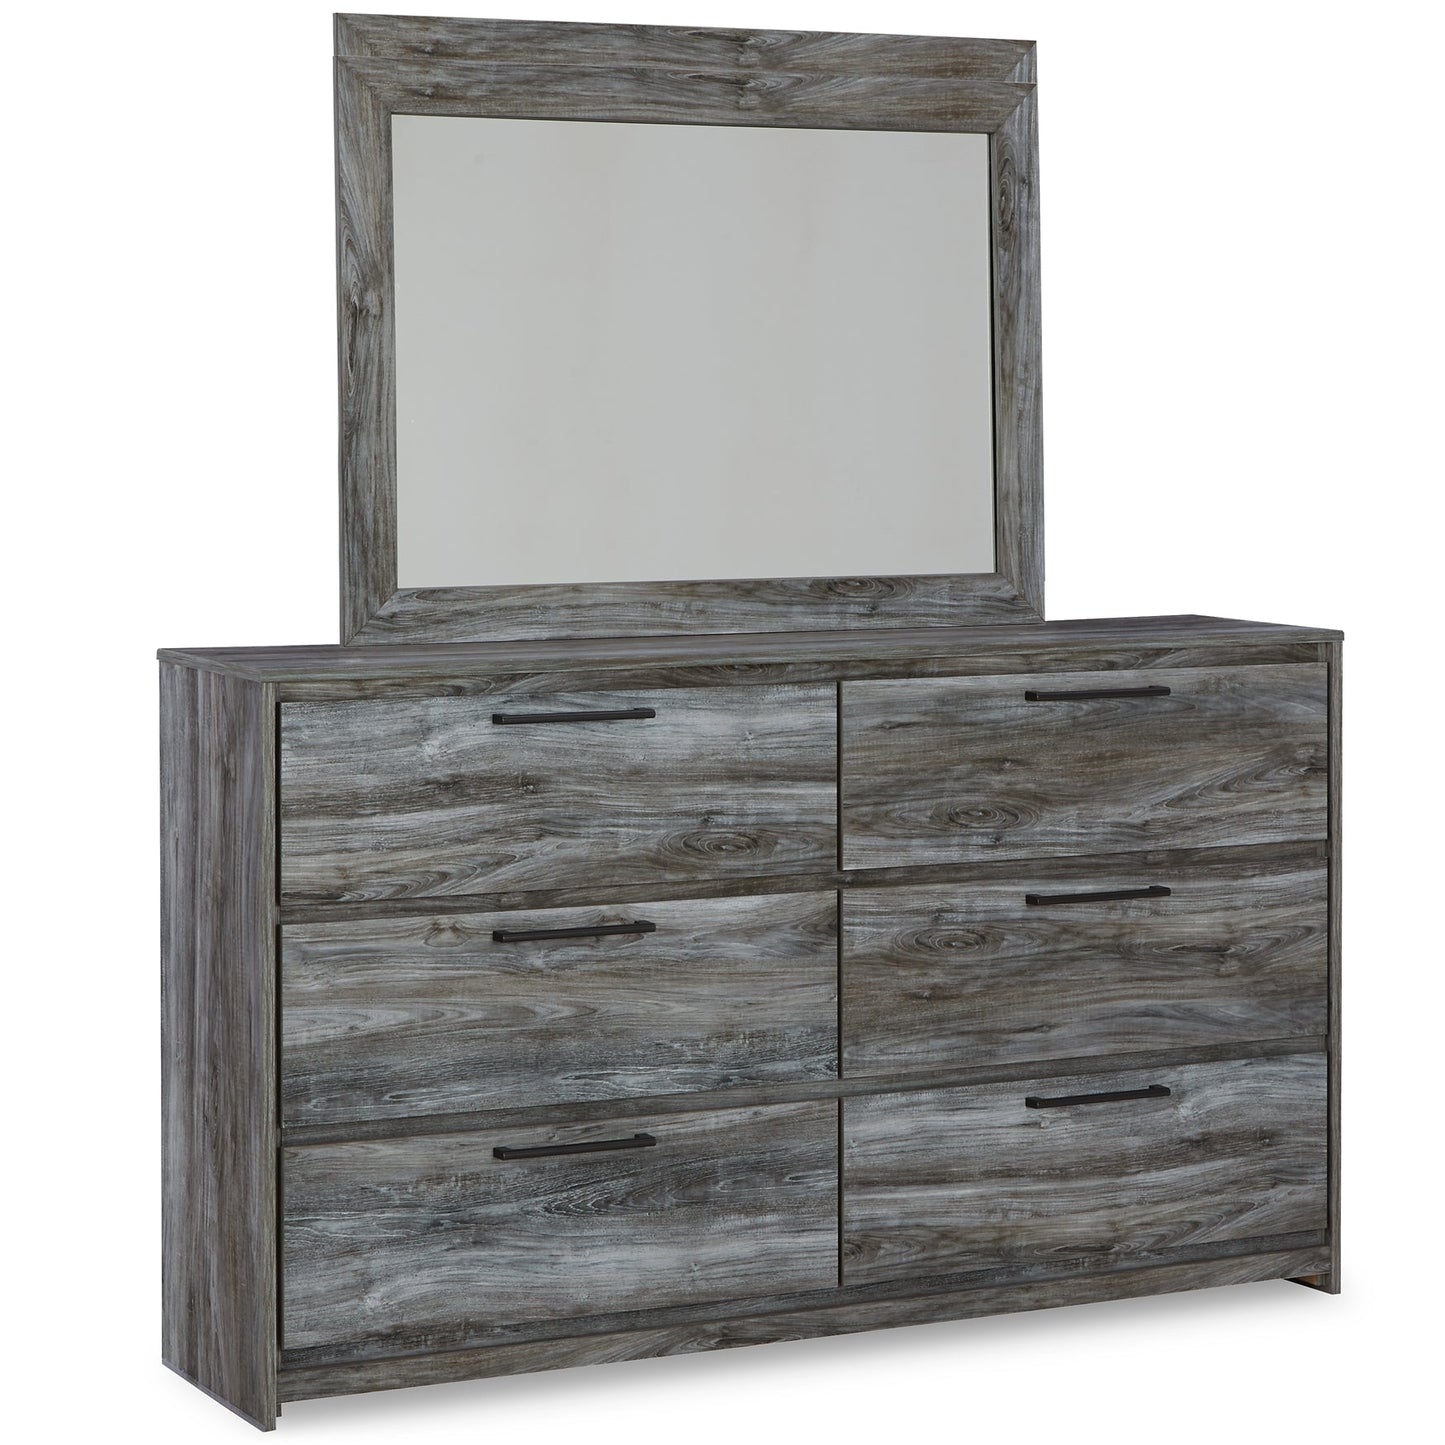 Baystorm Twin Panel Bed with Mirrored Dresser Rent Wise Rent To Own Jacksonville, Florida